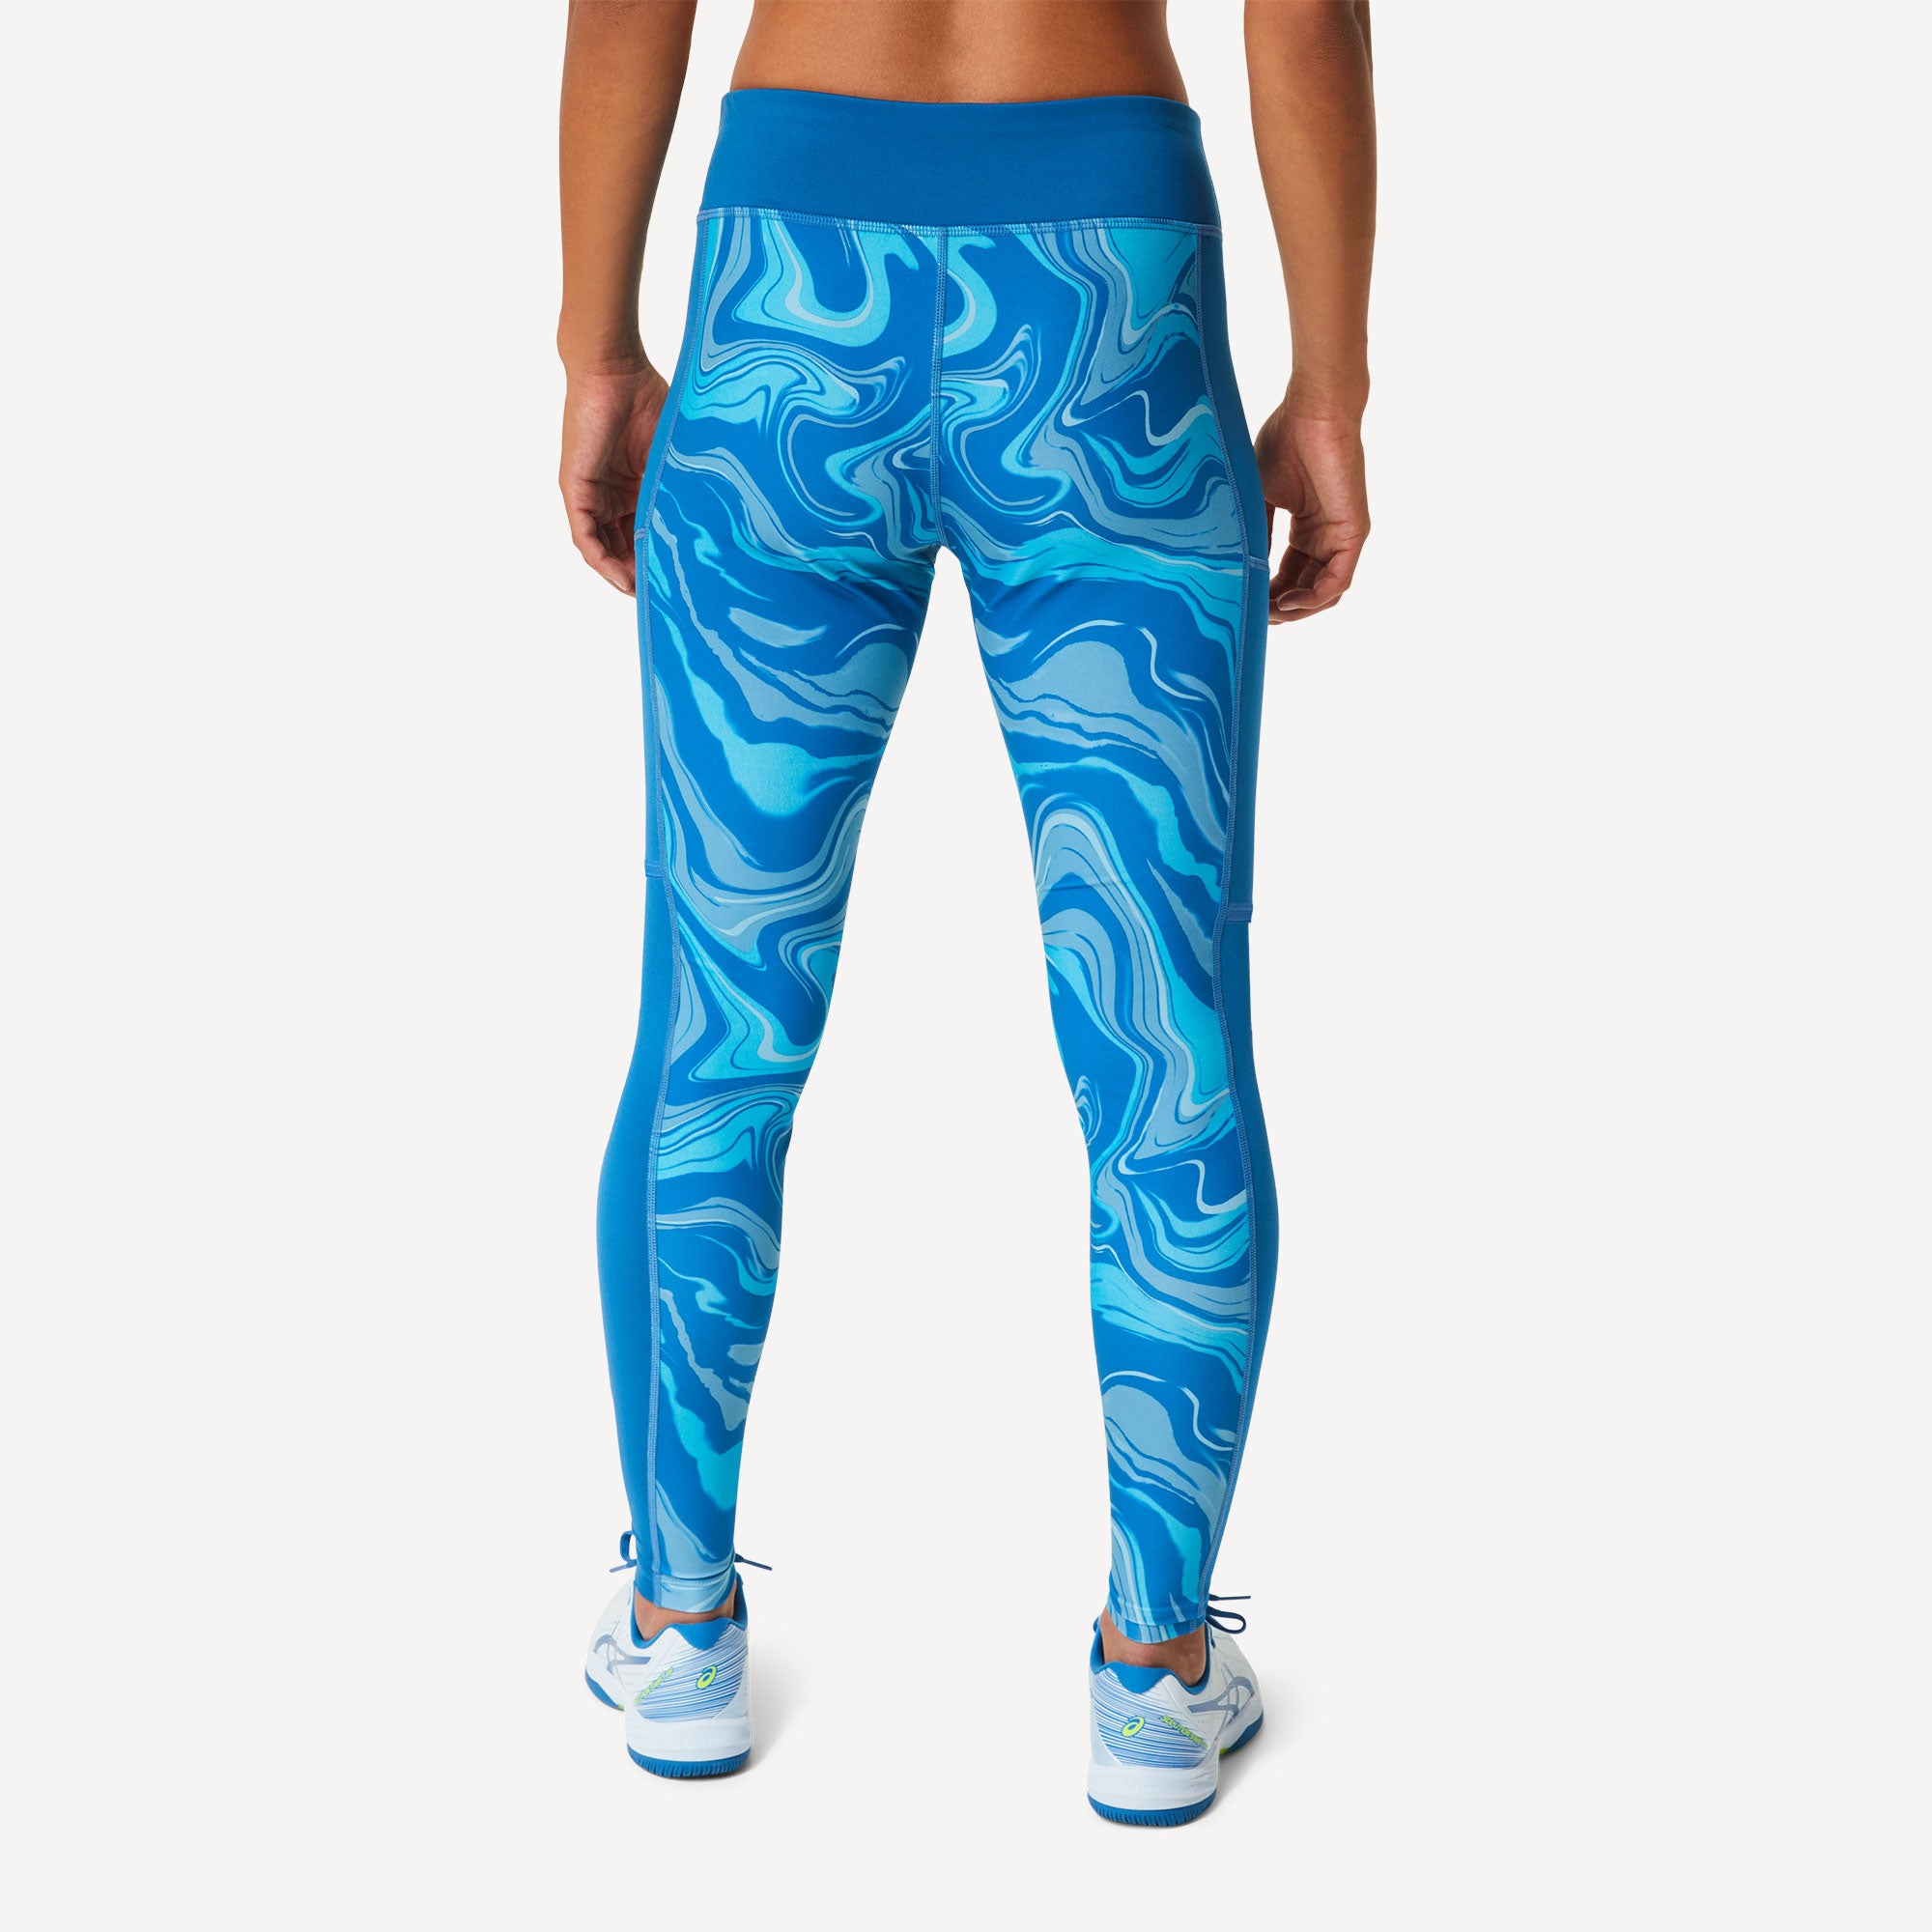 ASICS Women's Graphic Tights Blue (2)